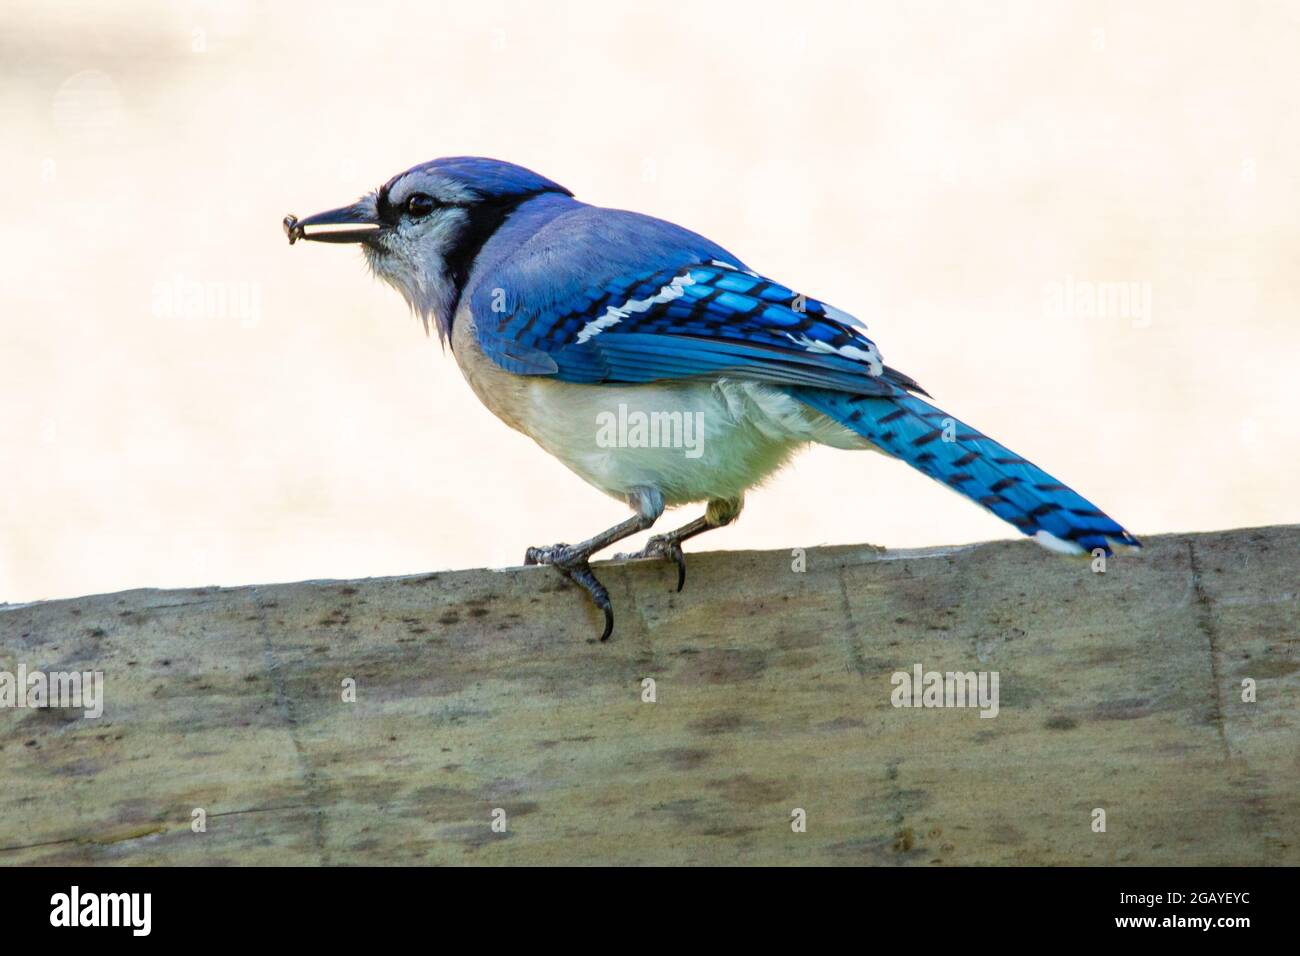 A Blue Jay (Cyanocitta cristata) with something in its beak is perched on a wooden fence. Stock Photo